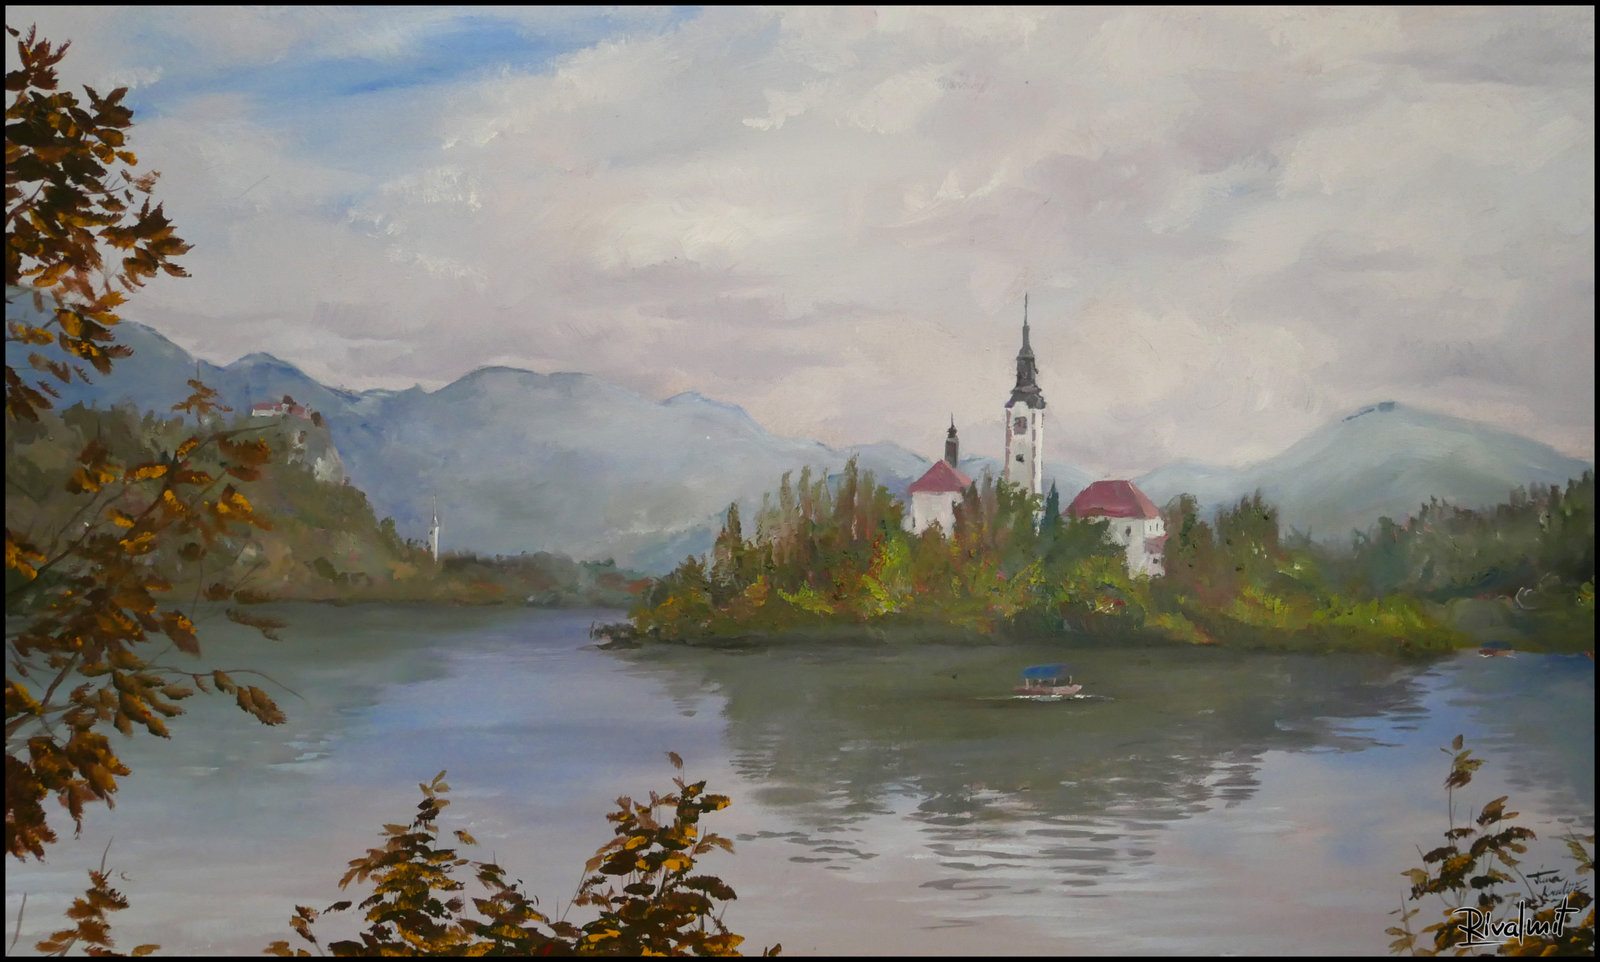 painting acrylic bled slovenia Bled